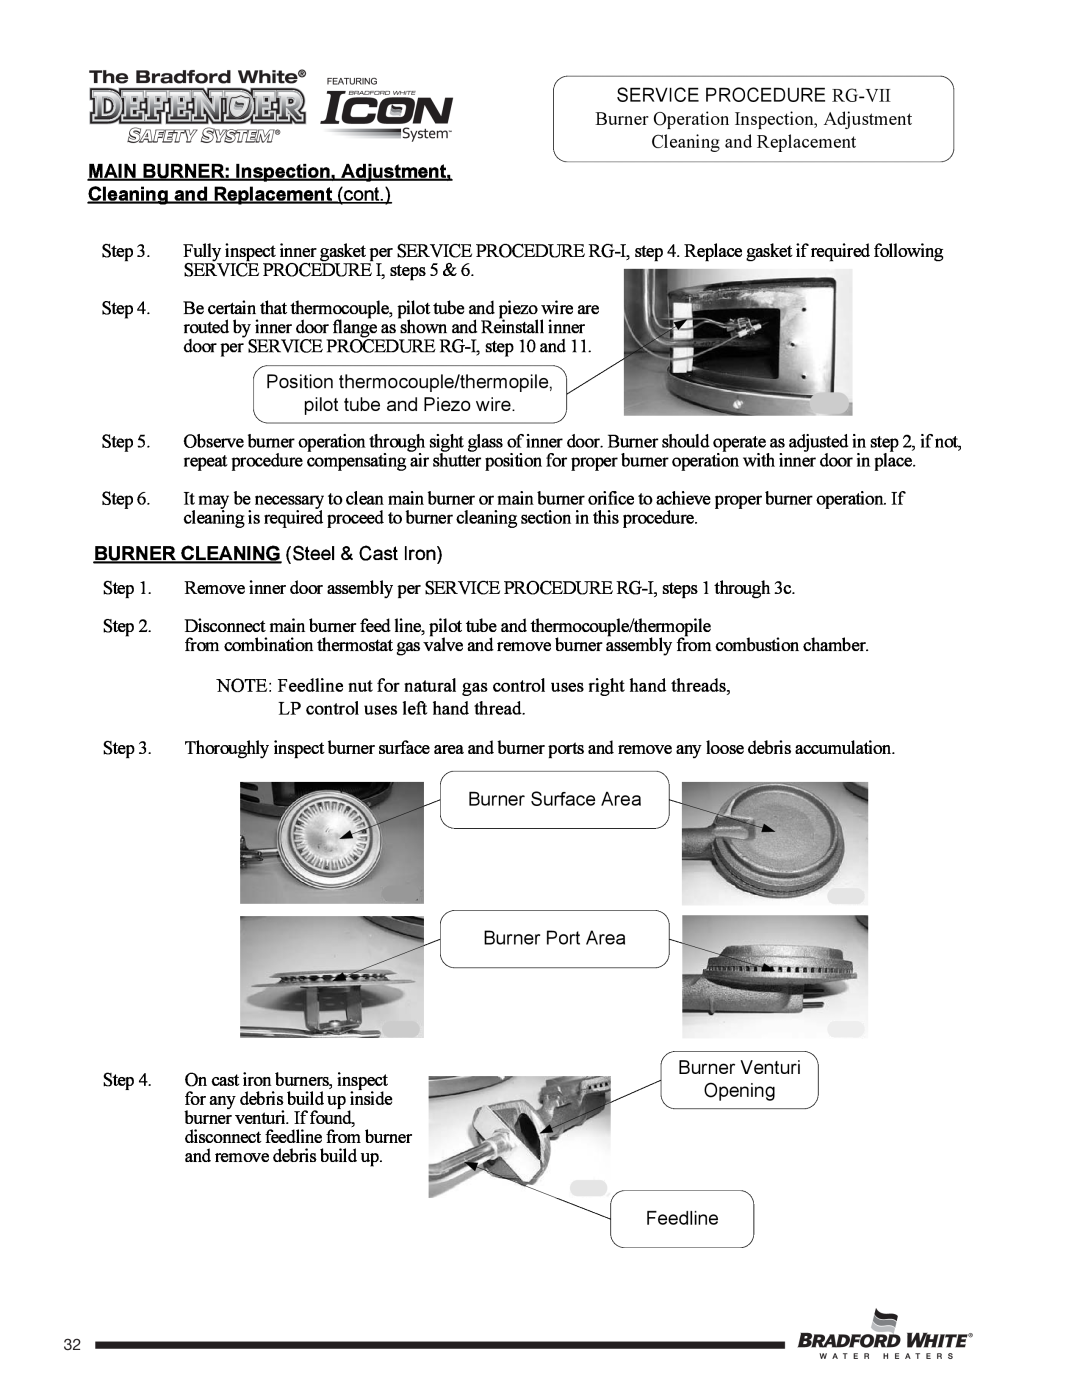 Bradford-White Corp Flammable Vapor Ignition Risistant Water Heaters service manual 